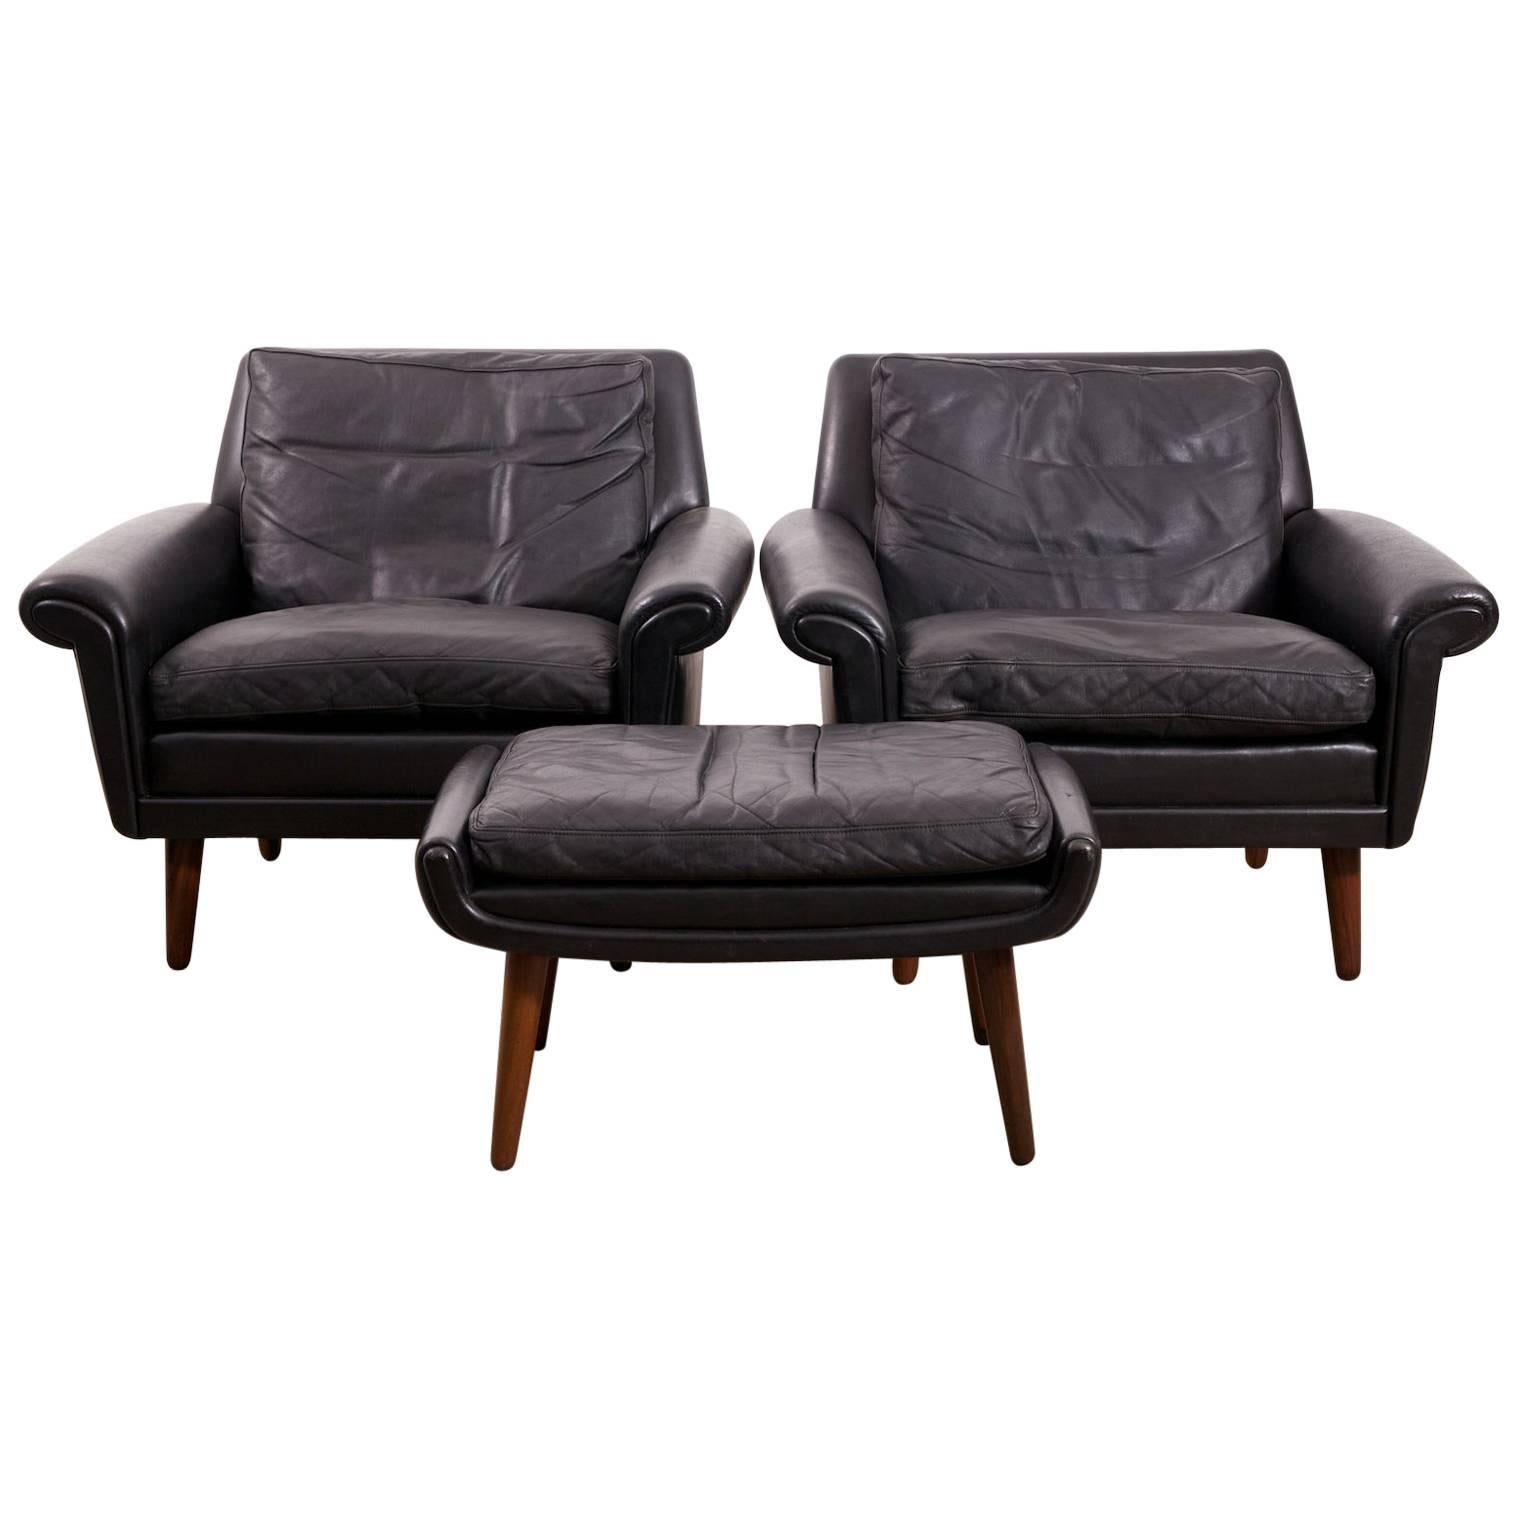 Diplomat Club Chairs & Ottoman For Sale